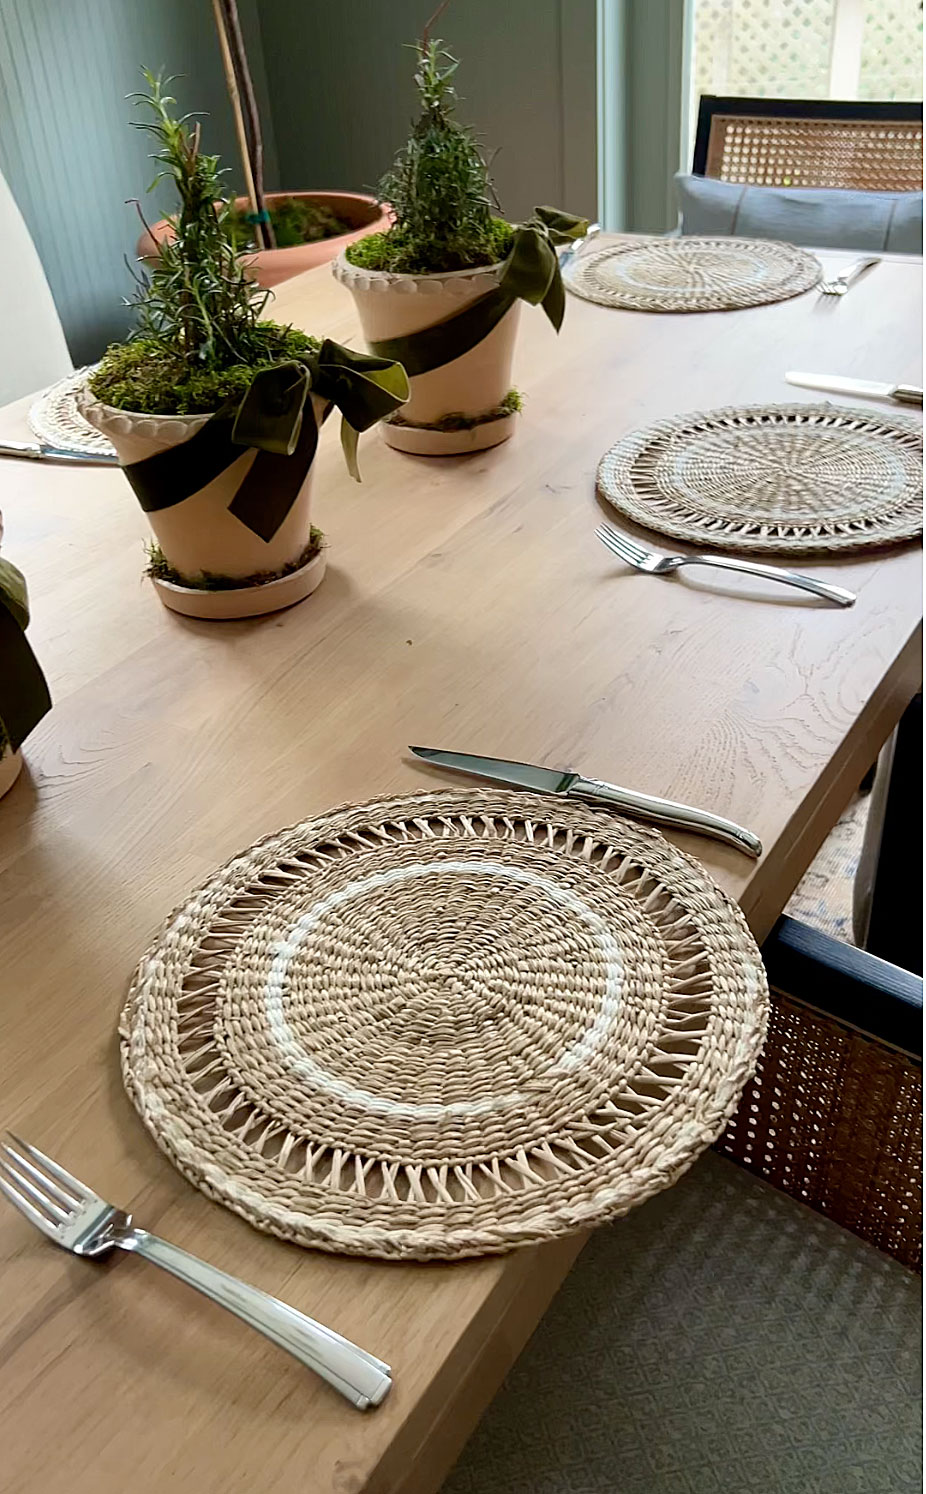 wicker Pottery Barn round place mats